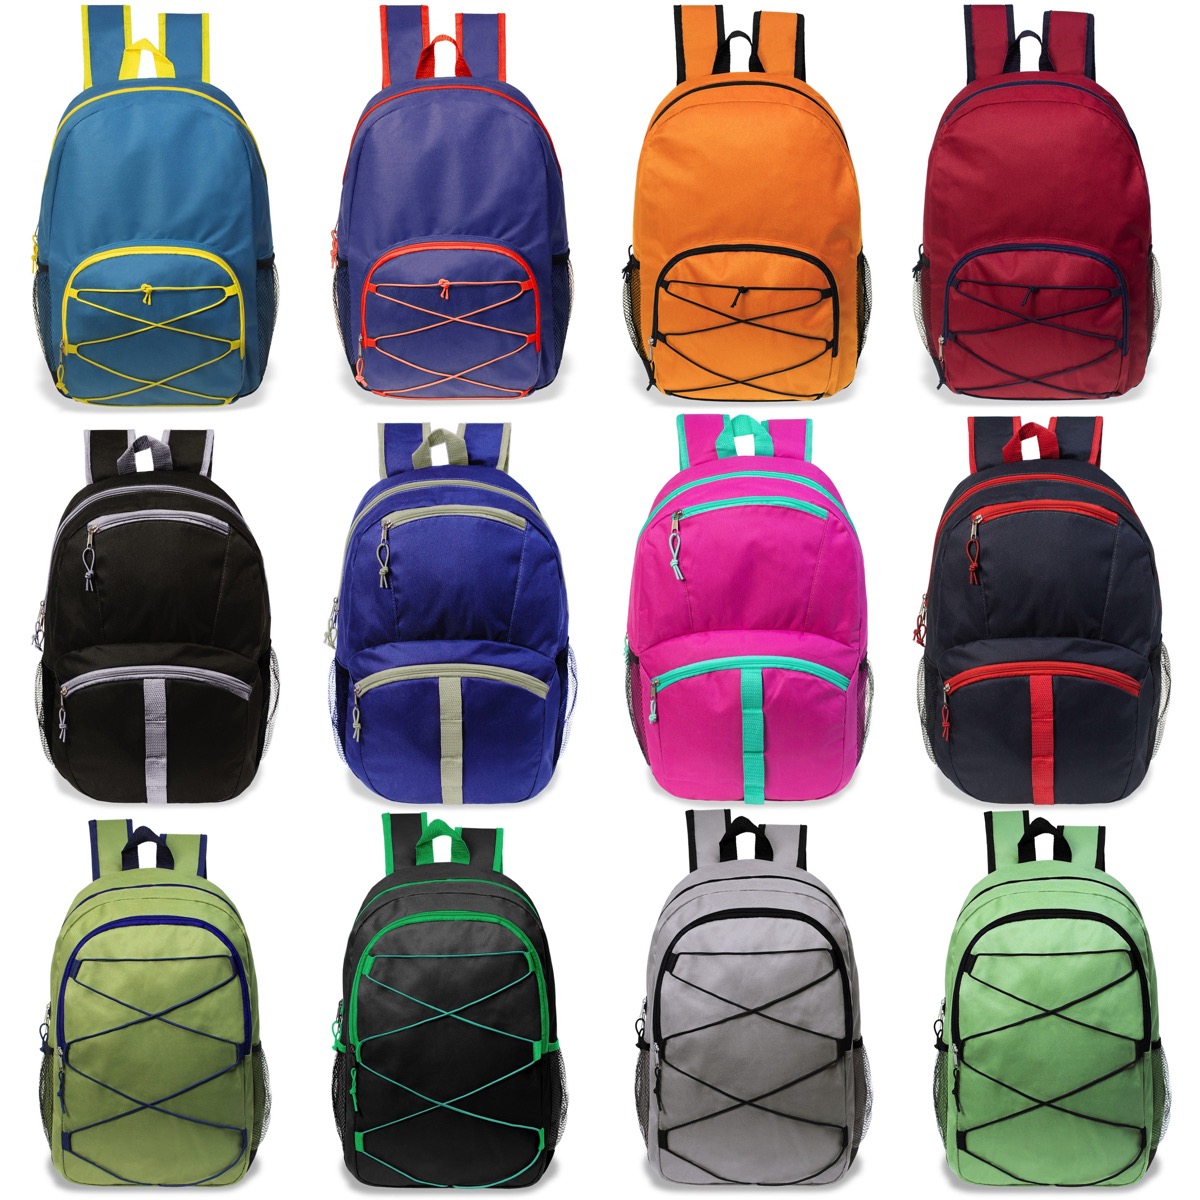 ''17'''' Two Tone Bungee BACKPACKs - Assorted & Neon Colors''